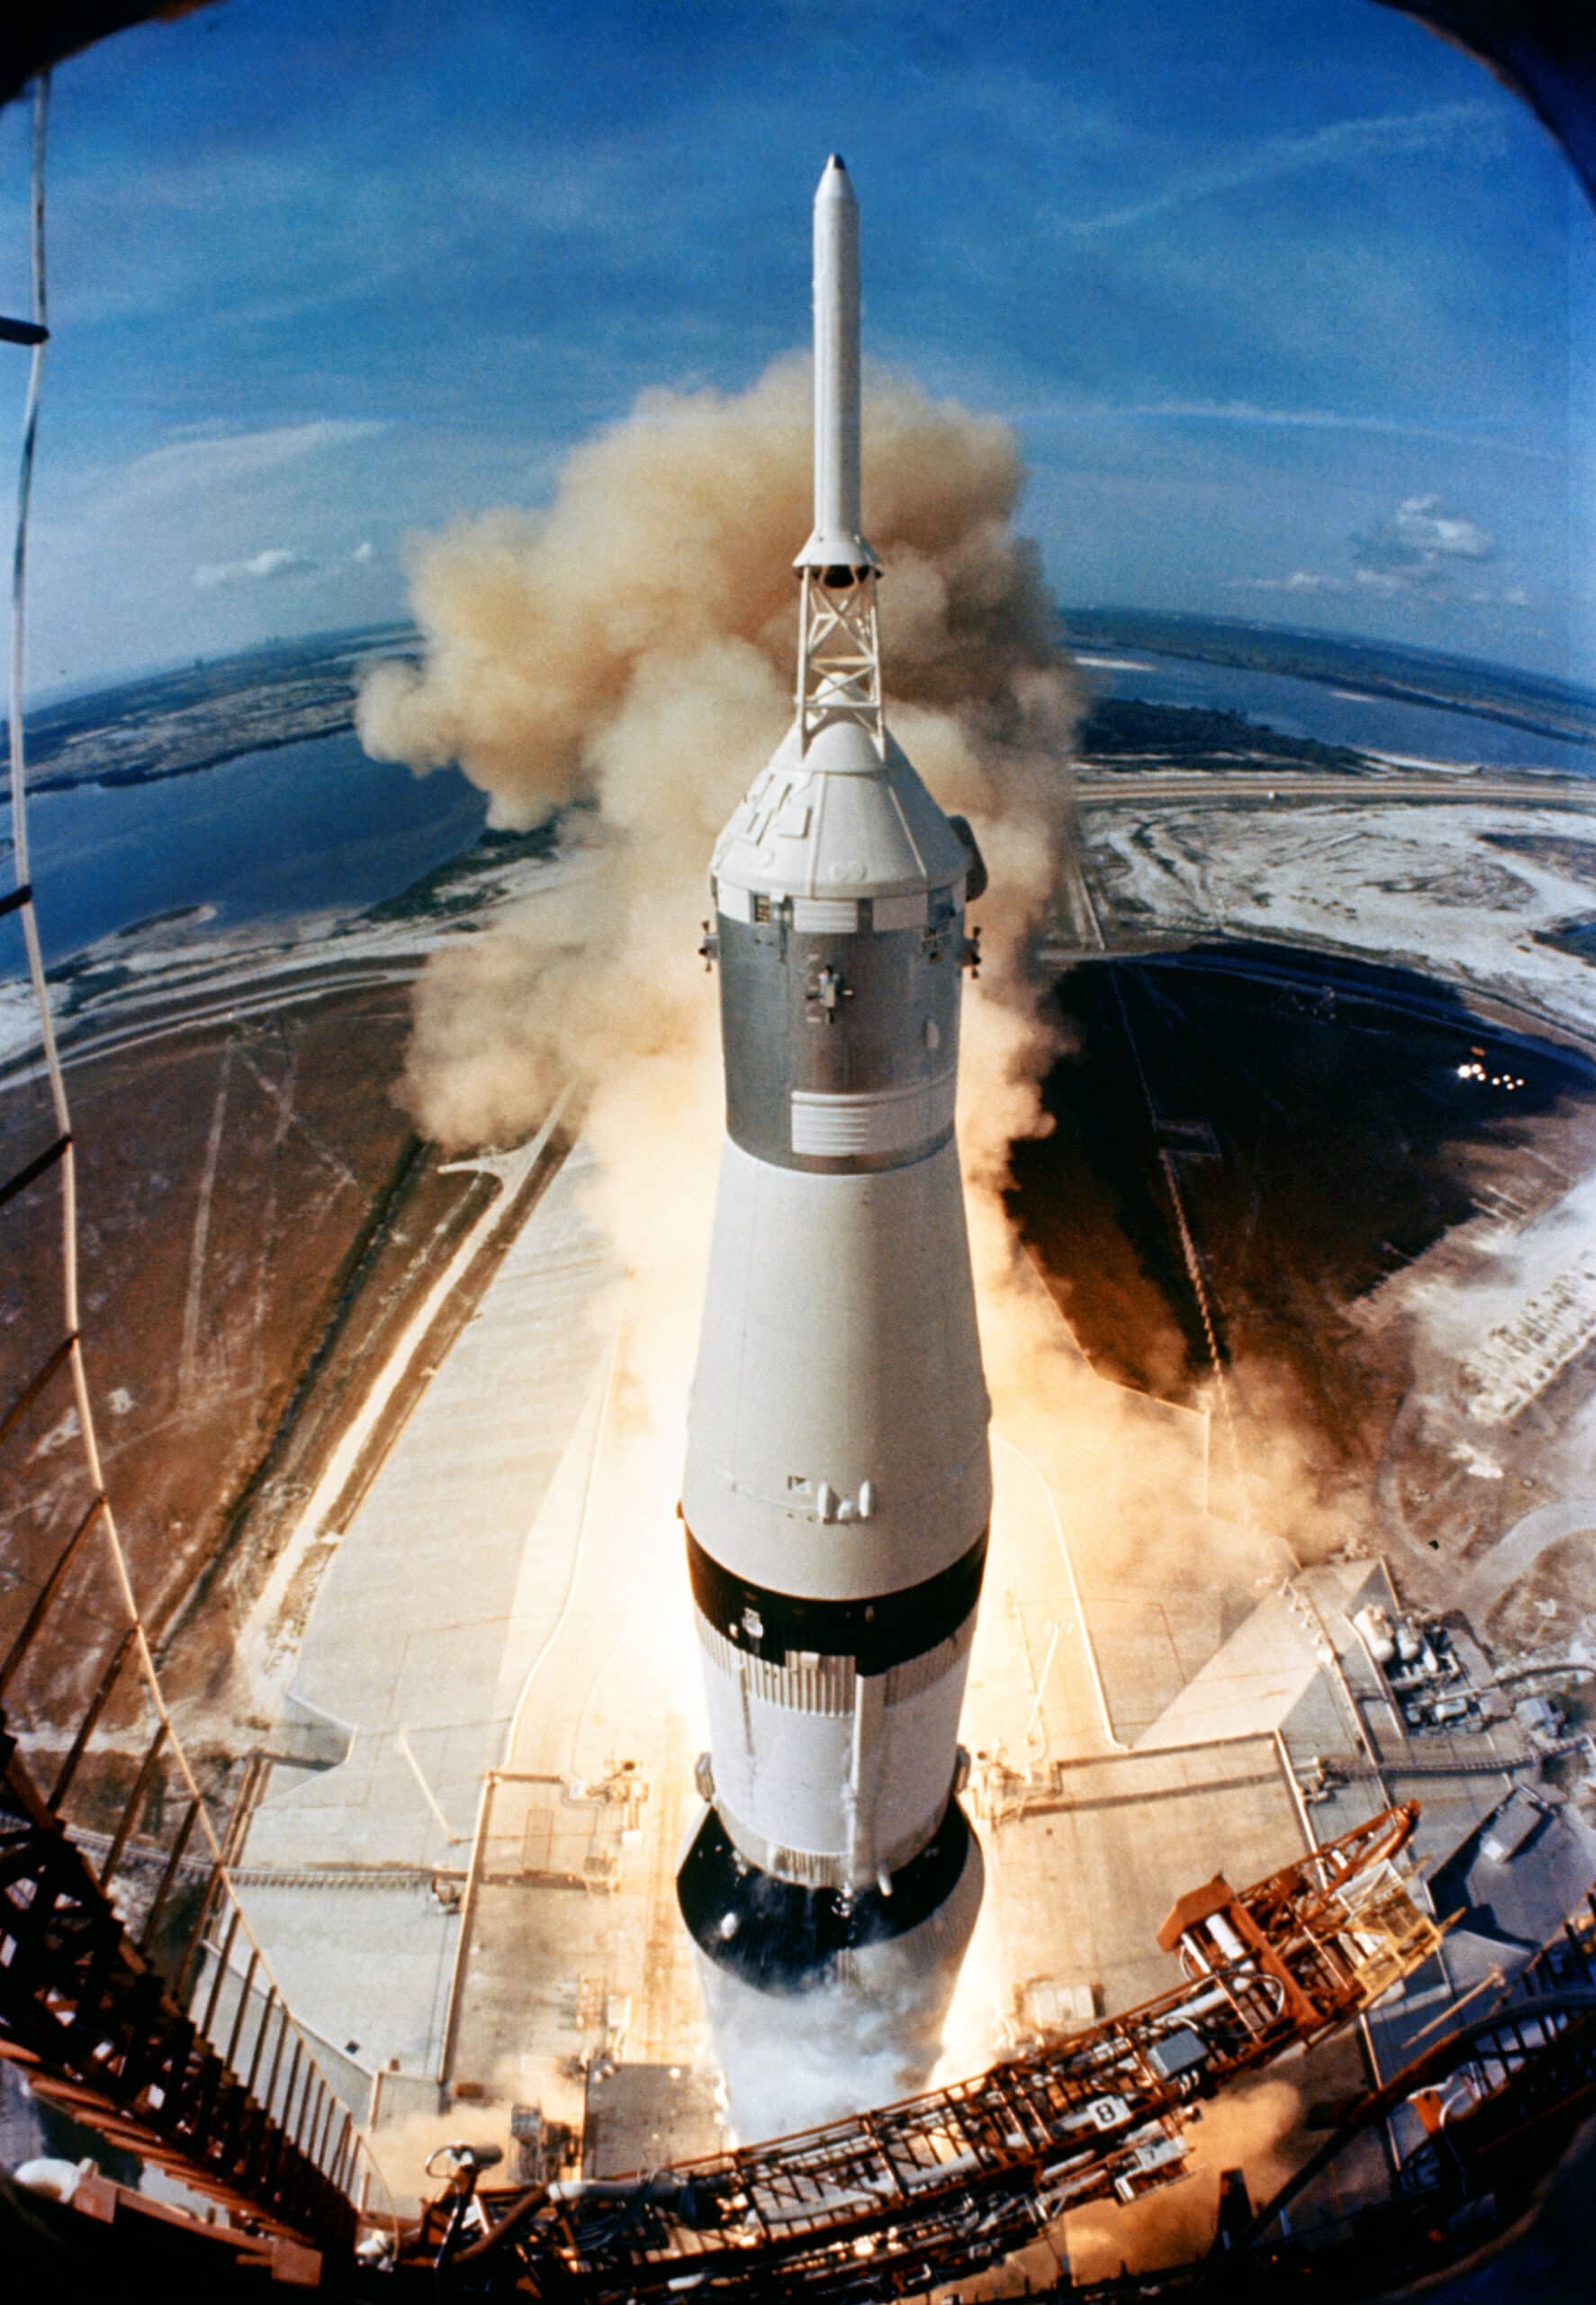 Apollo 11 picture make great wallpaper [Wallpaper Wednesday]. Cult of Mac